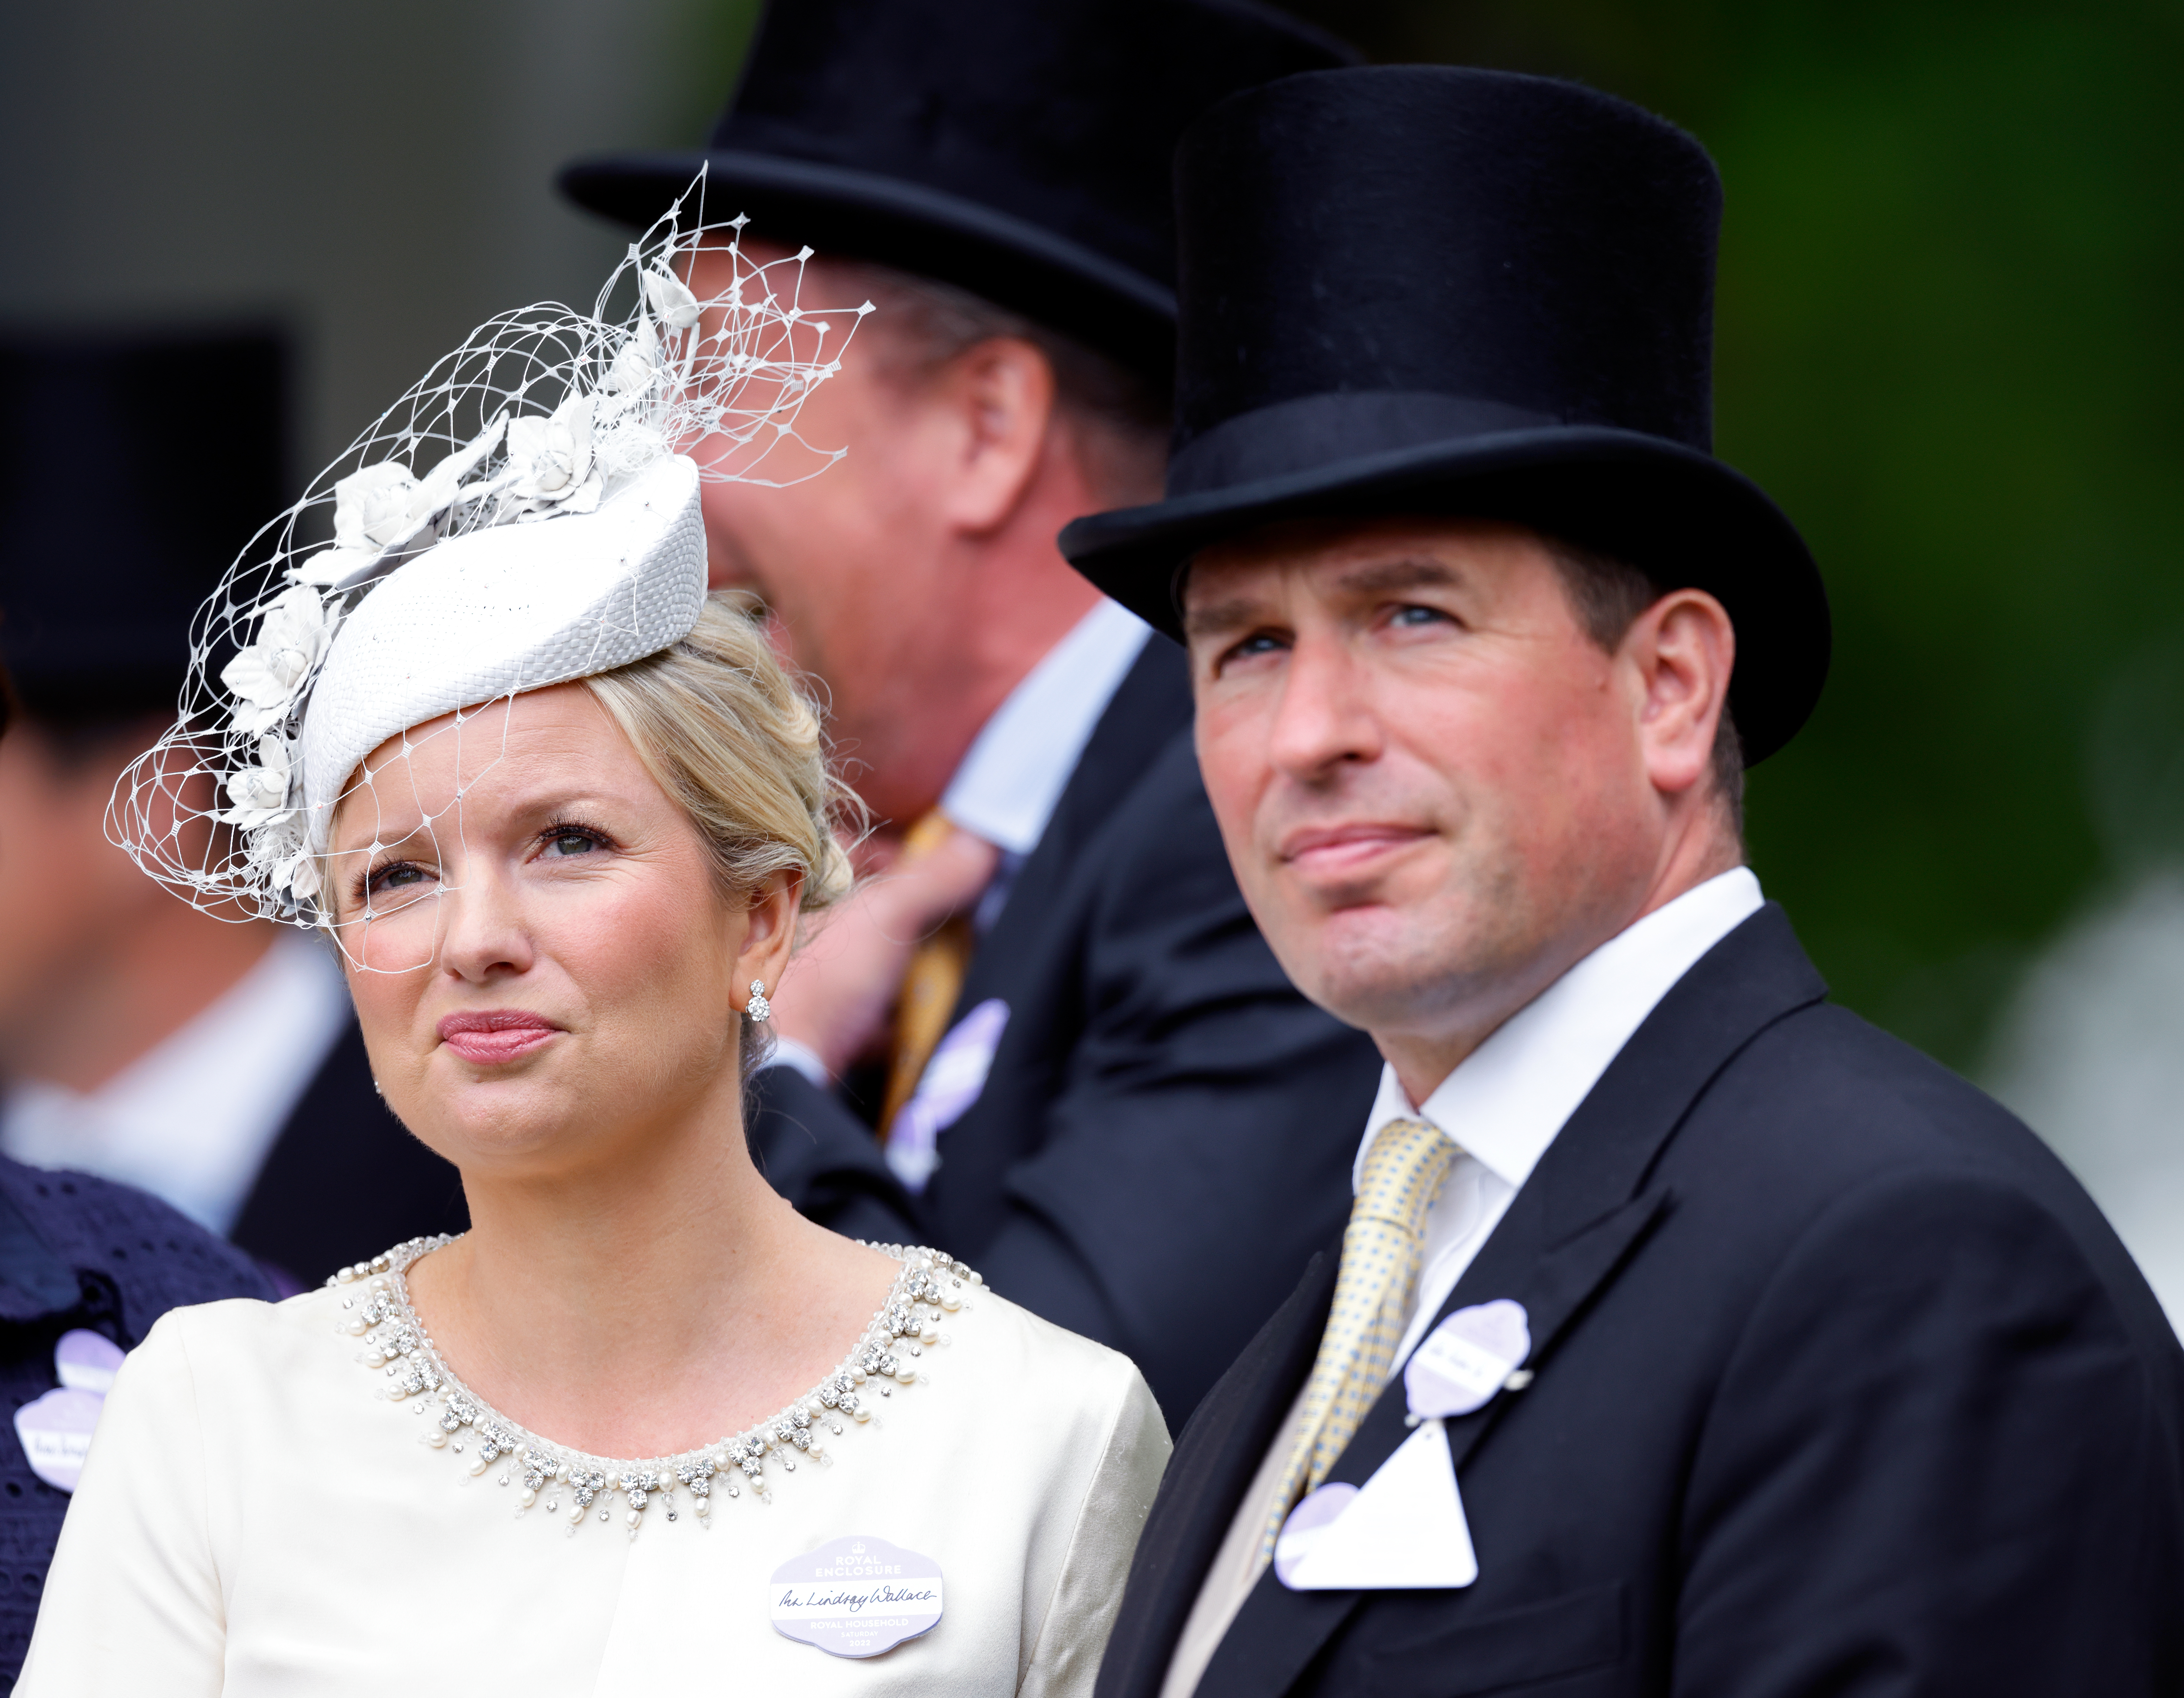 Lindsay Wallace and Peter Phillips on Day 5 of Royal Ascot in Ascot, England on June 18, 2022 | Source: Getty Images